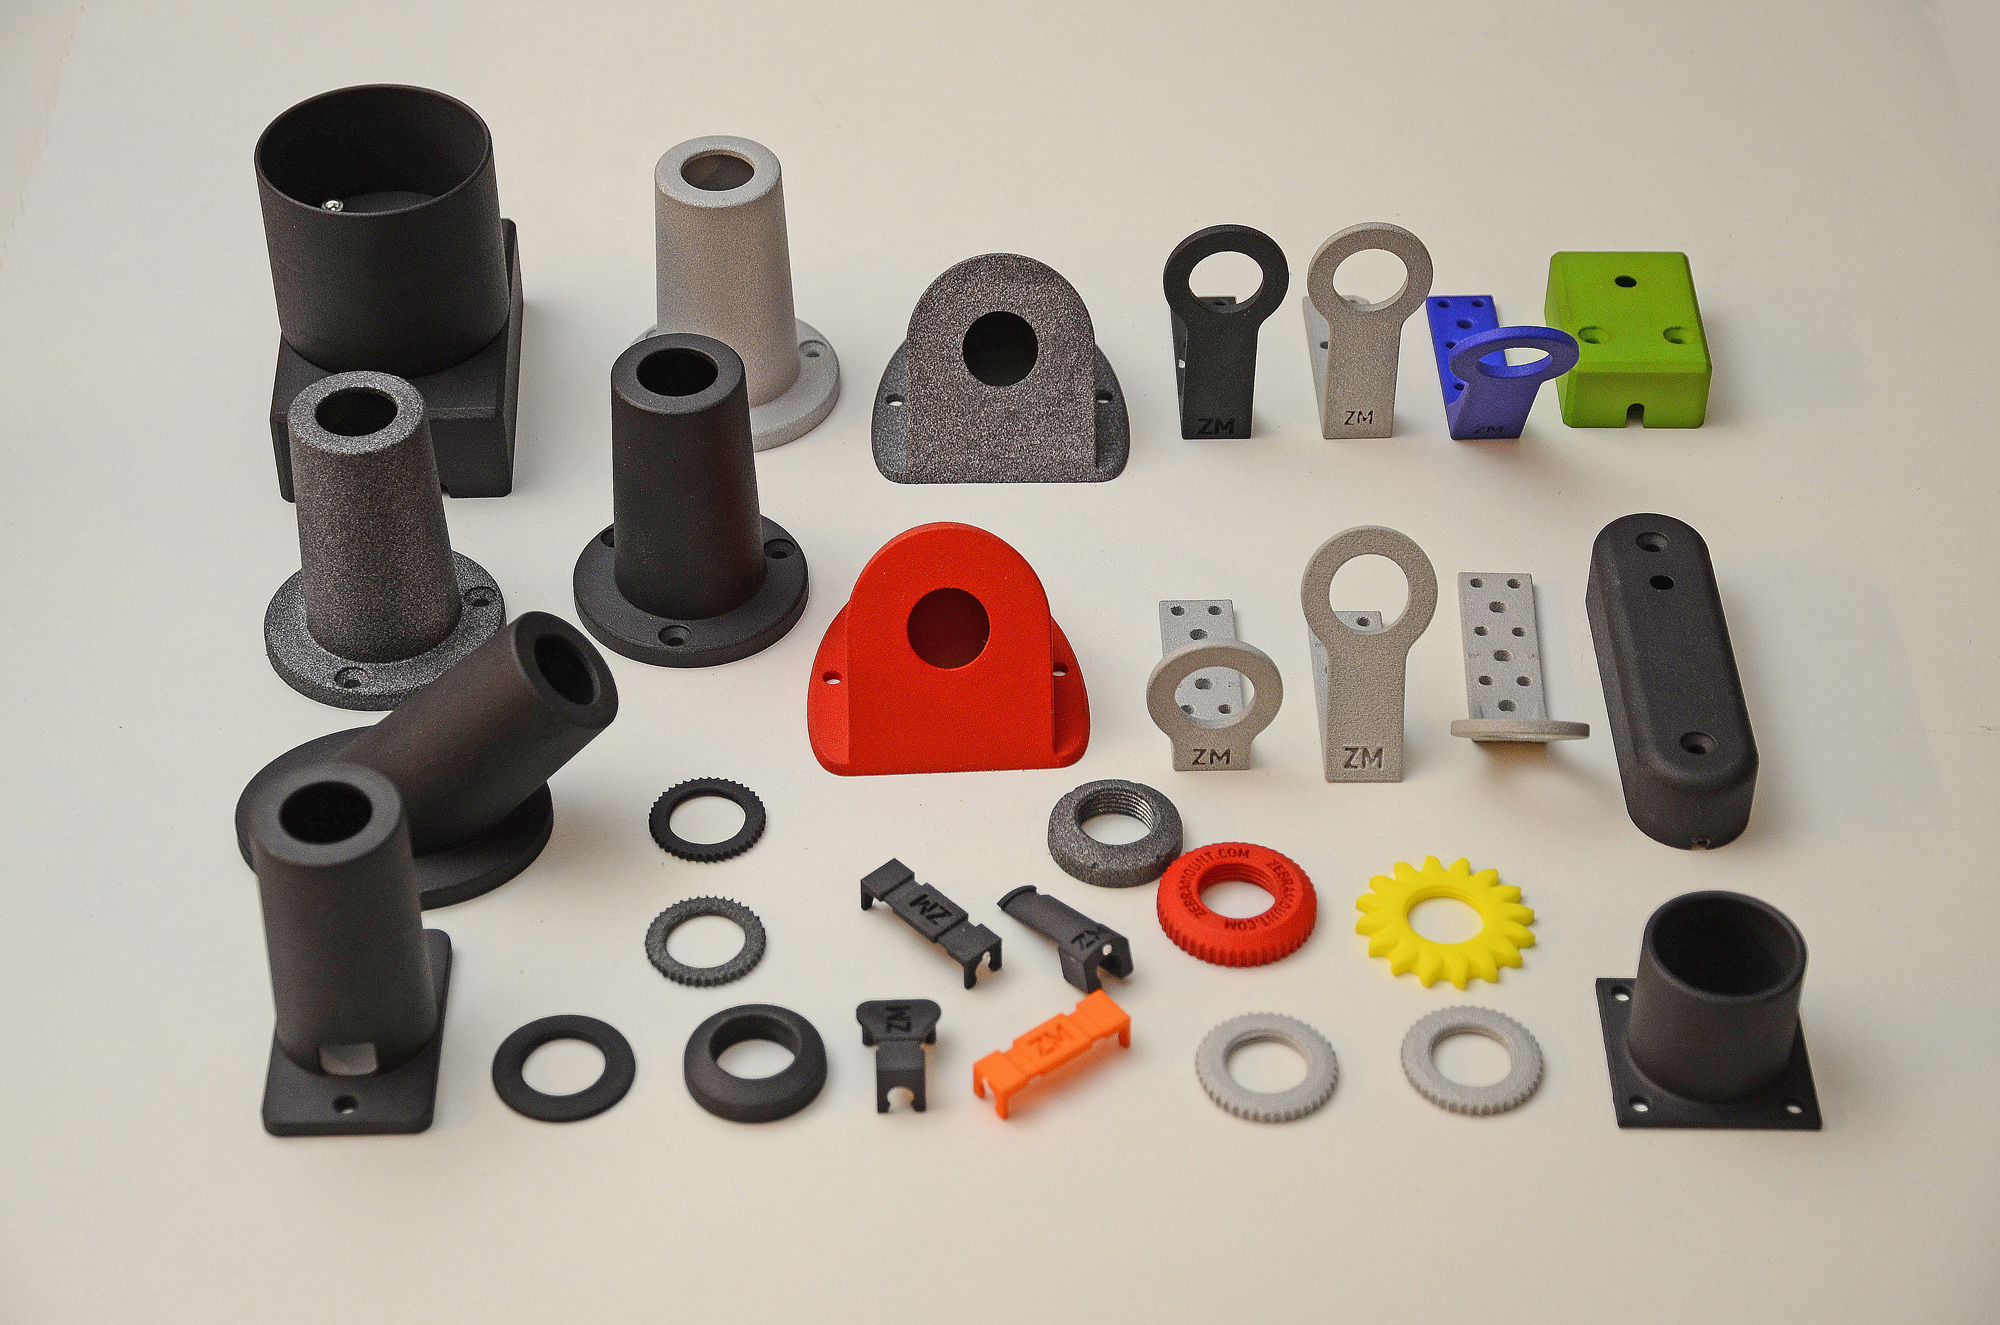 An assortment of our parts meant for mounting surveilance cameras